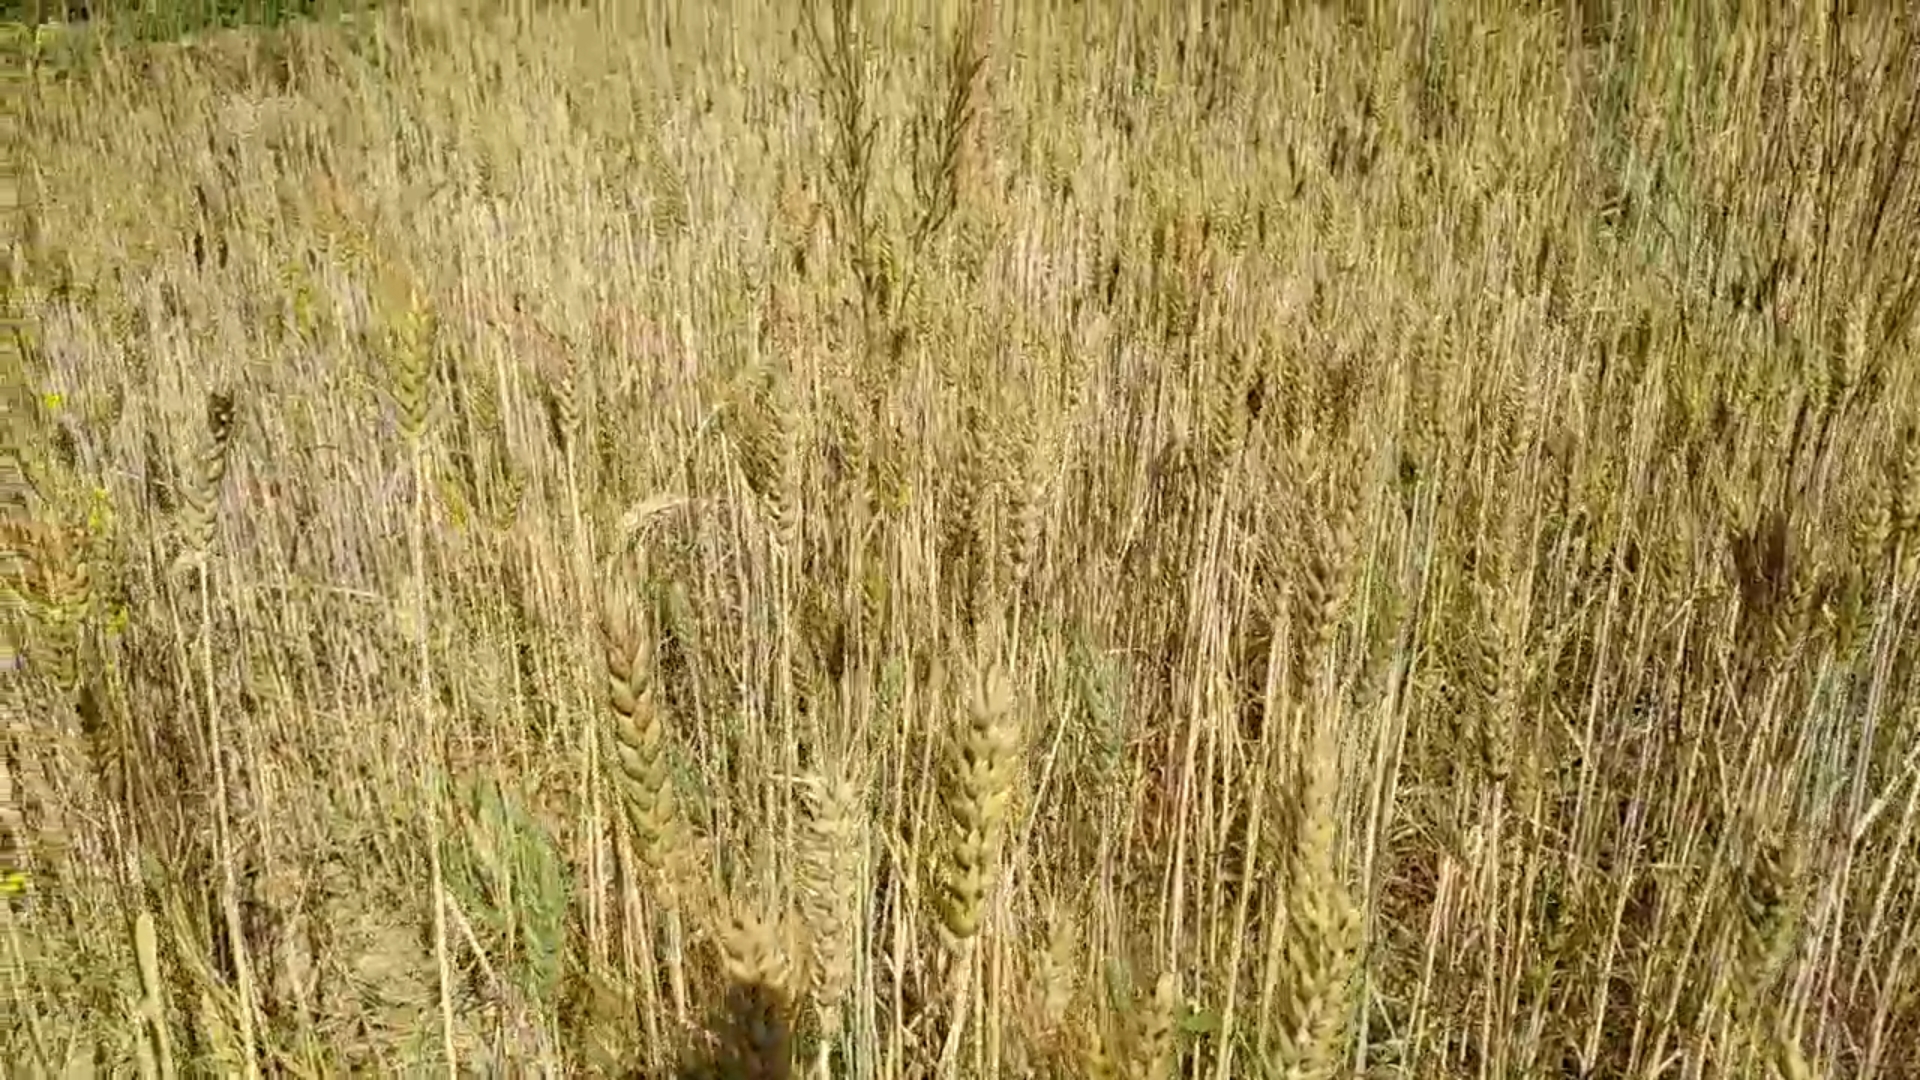 Black wheat during harvest time